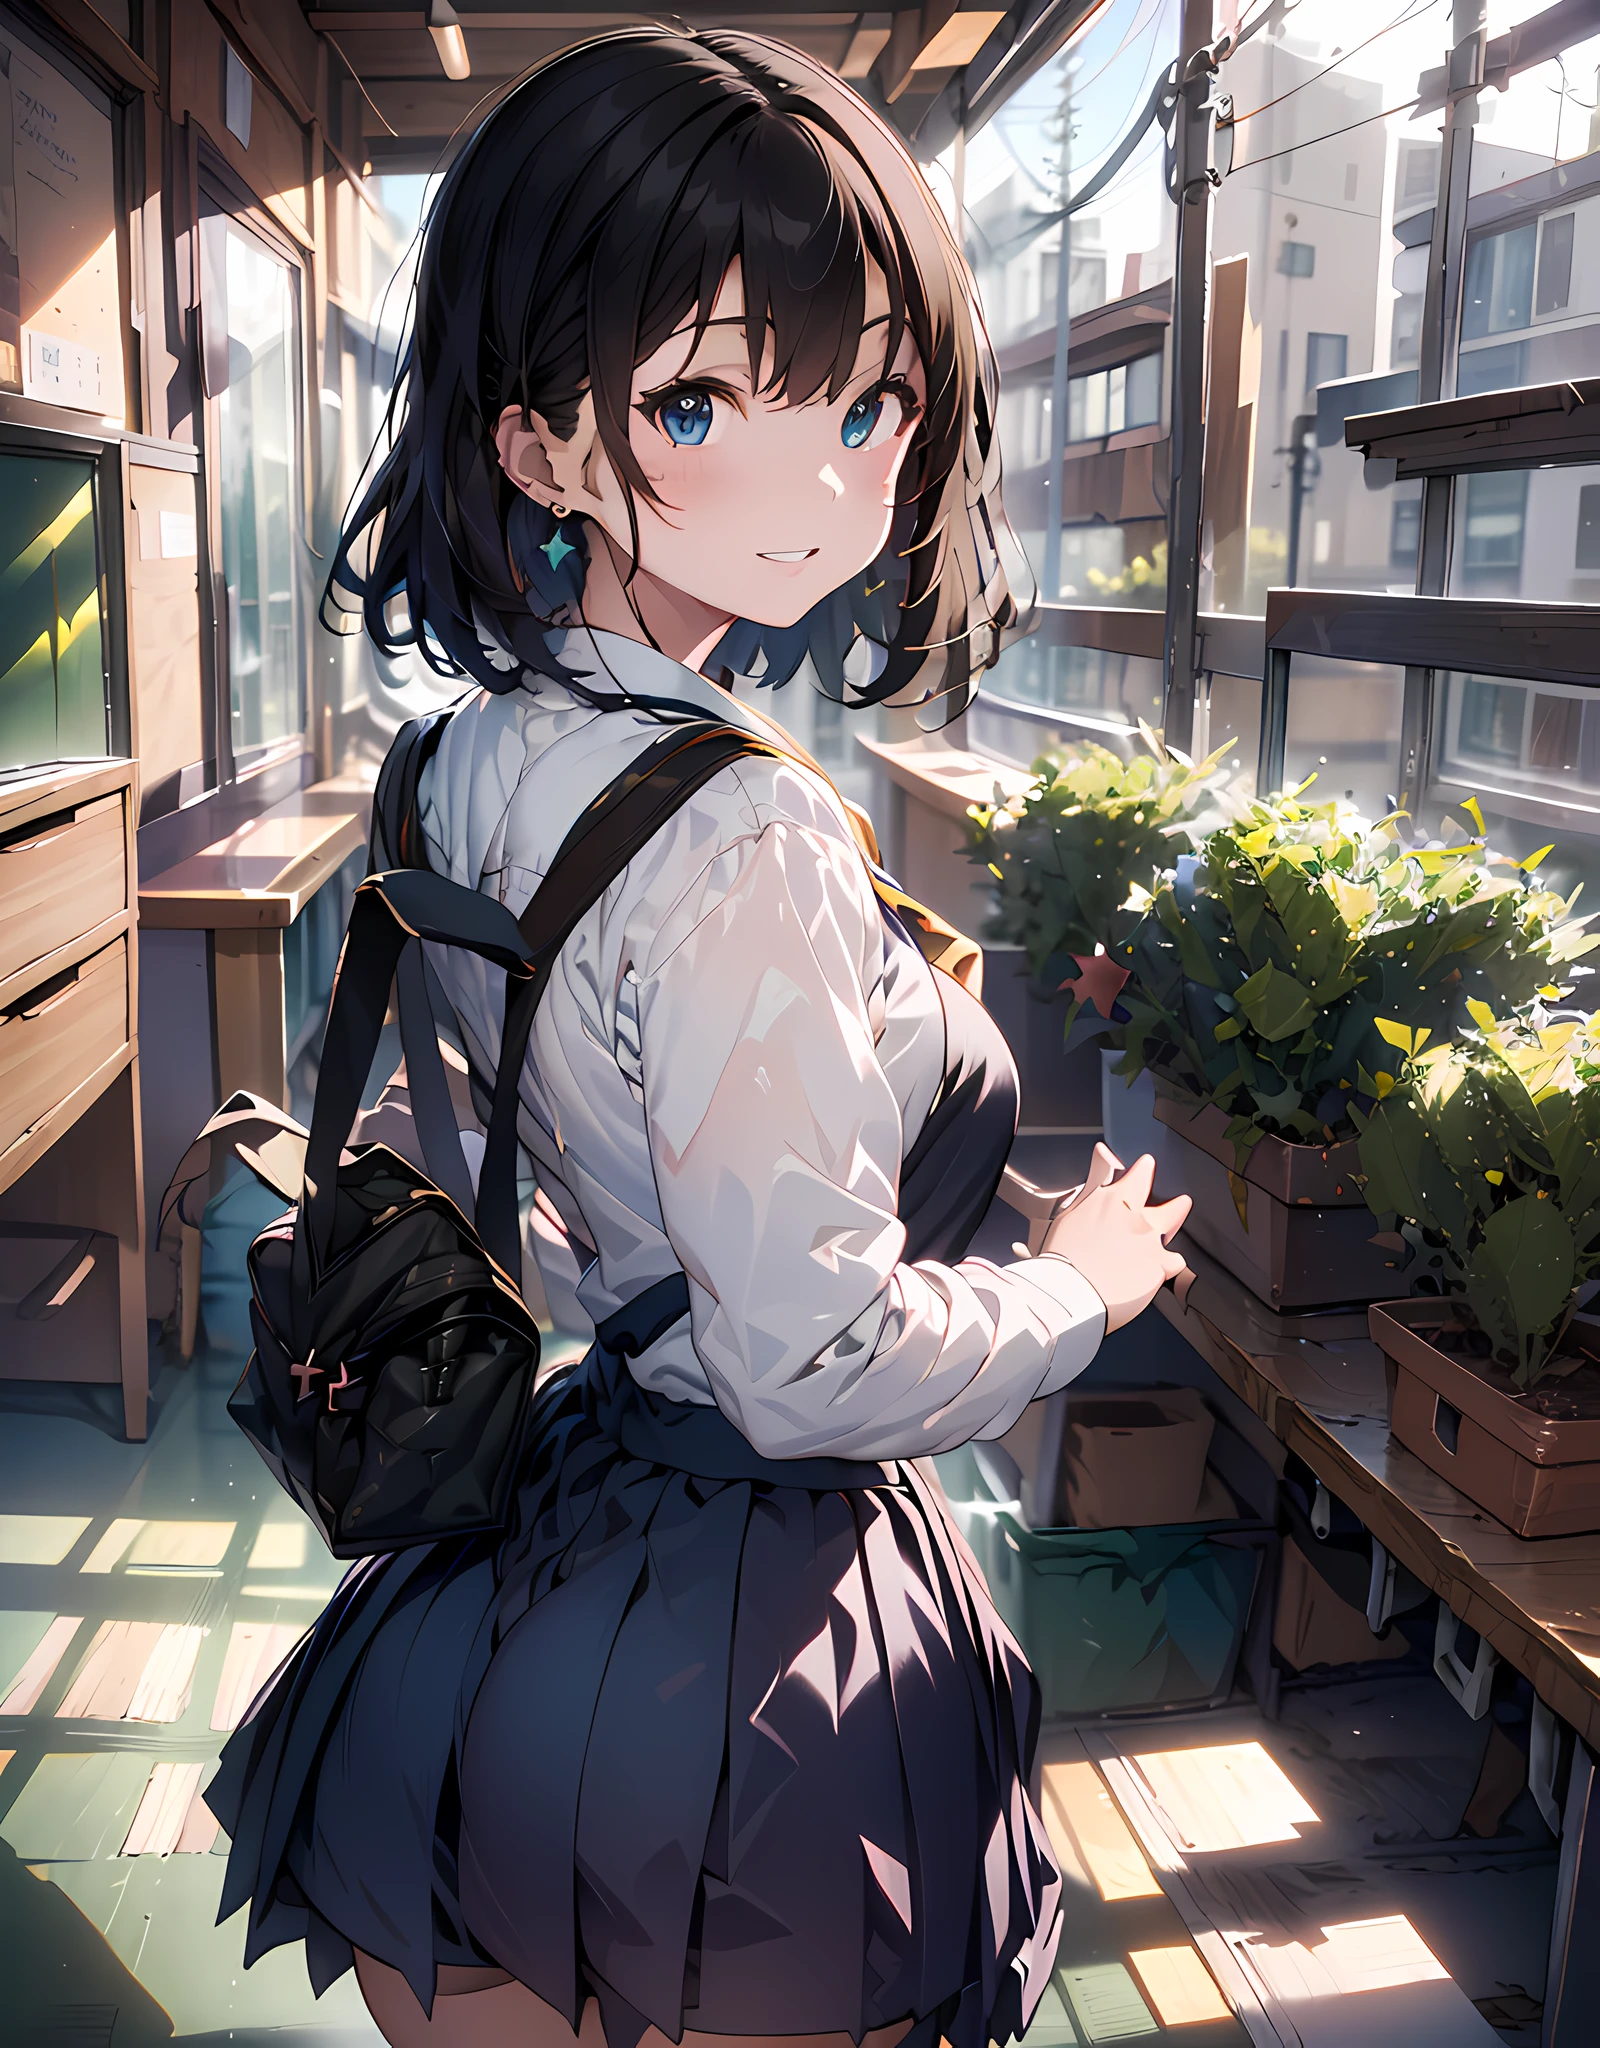 (masterpiece, best quality:1.37), highres, ultra-detailed, ultra-sharp, BREAK, Japanese school girl model, 1girl, (black hair, short hair, bangs), blue eyes, jewelry, earrings, piercing, BREAK, ((detailed school girl uniform:1.5), collard sailor shirt, yellow tie, dark-green pleats skirt, lovely look), grin, light smile, parted lips, pink lipstick, BREAK, standing, look back, from behind, cowboy shot, detailed human hands, HDTV:1.2, ((detailed school room background:1.3)), 8 life size, slender, anime style, anime style school girl, perfect anatomy, perfect proportion, inspiration from Kyoto animation and A-1 picture,